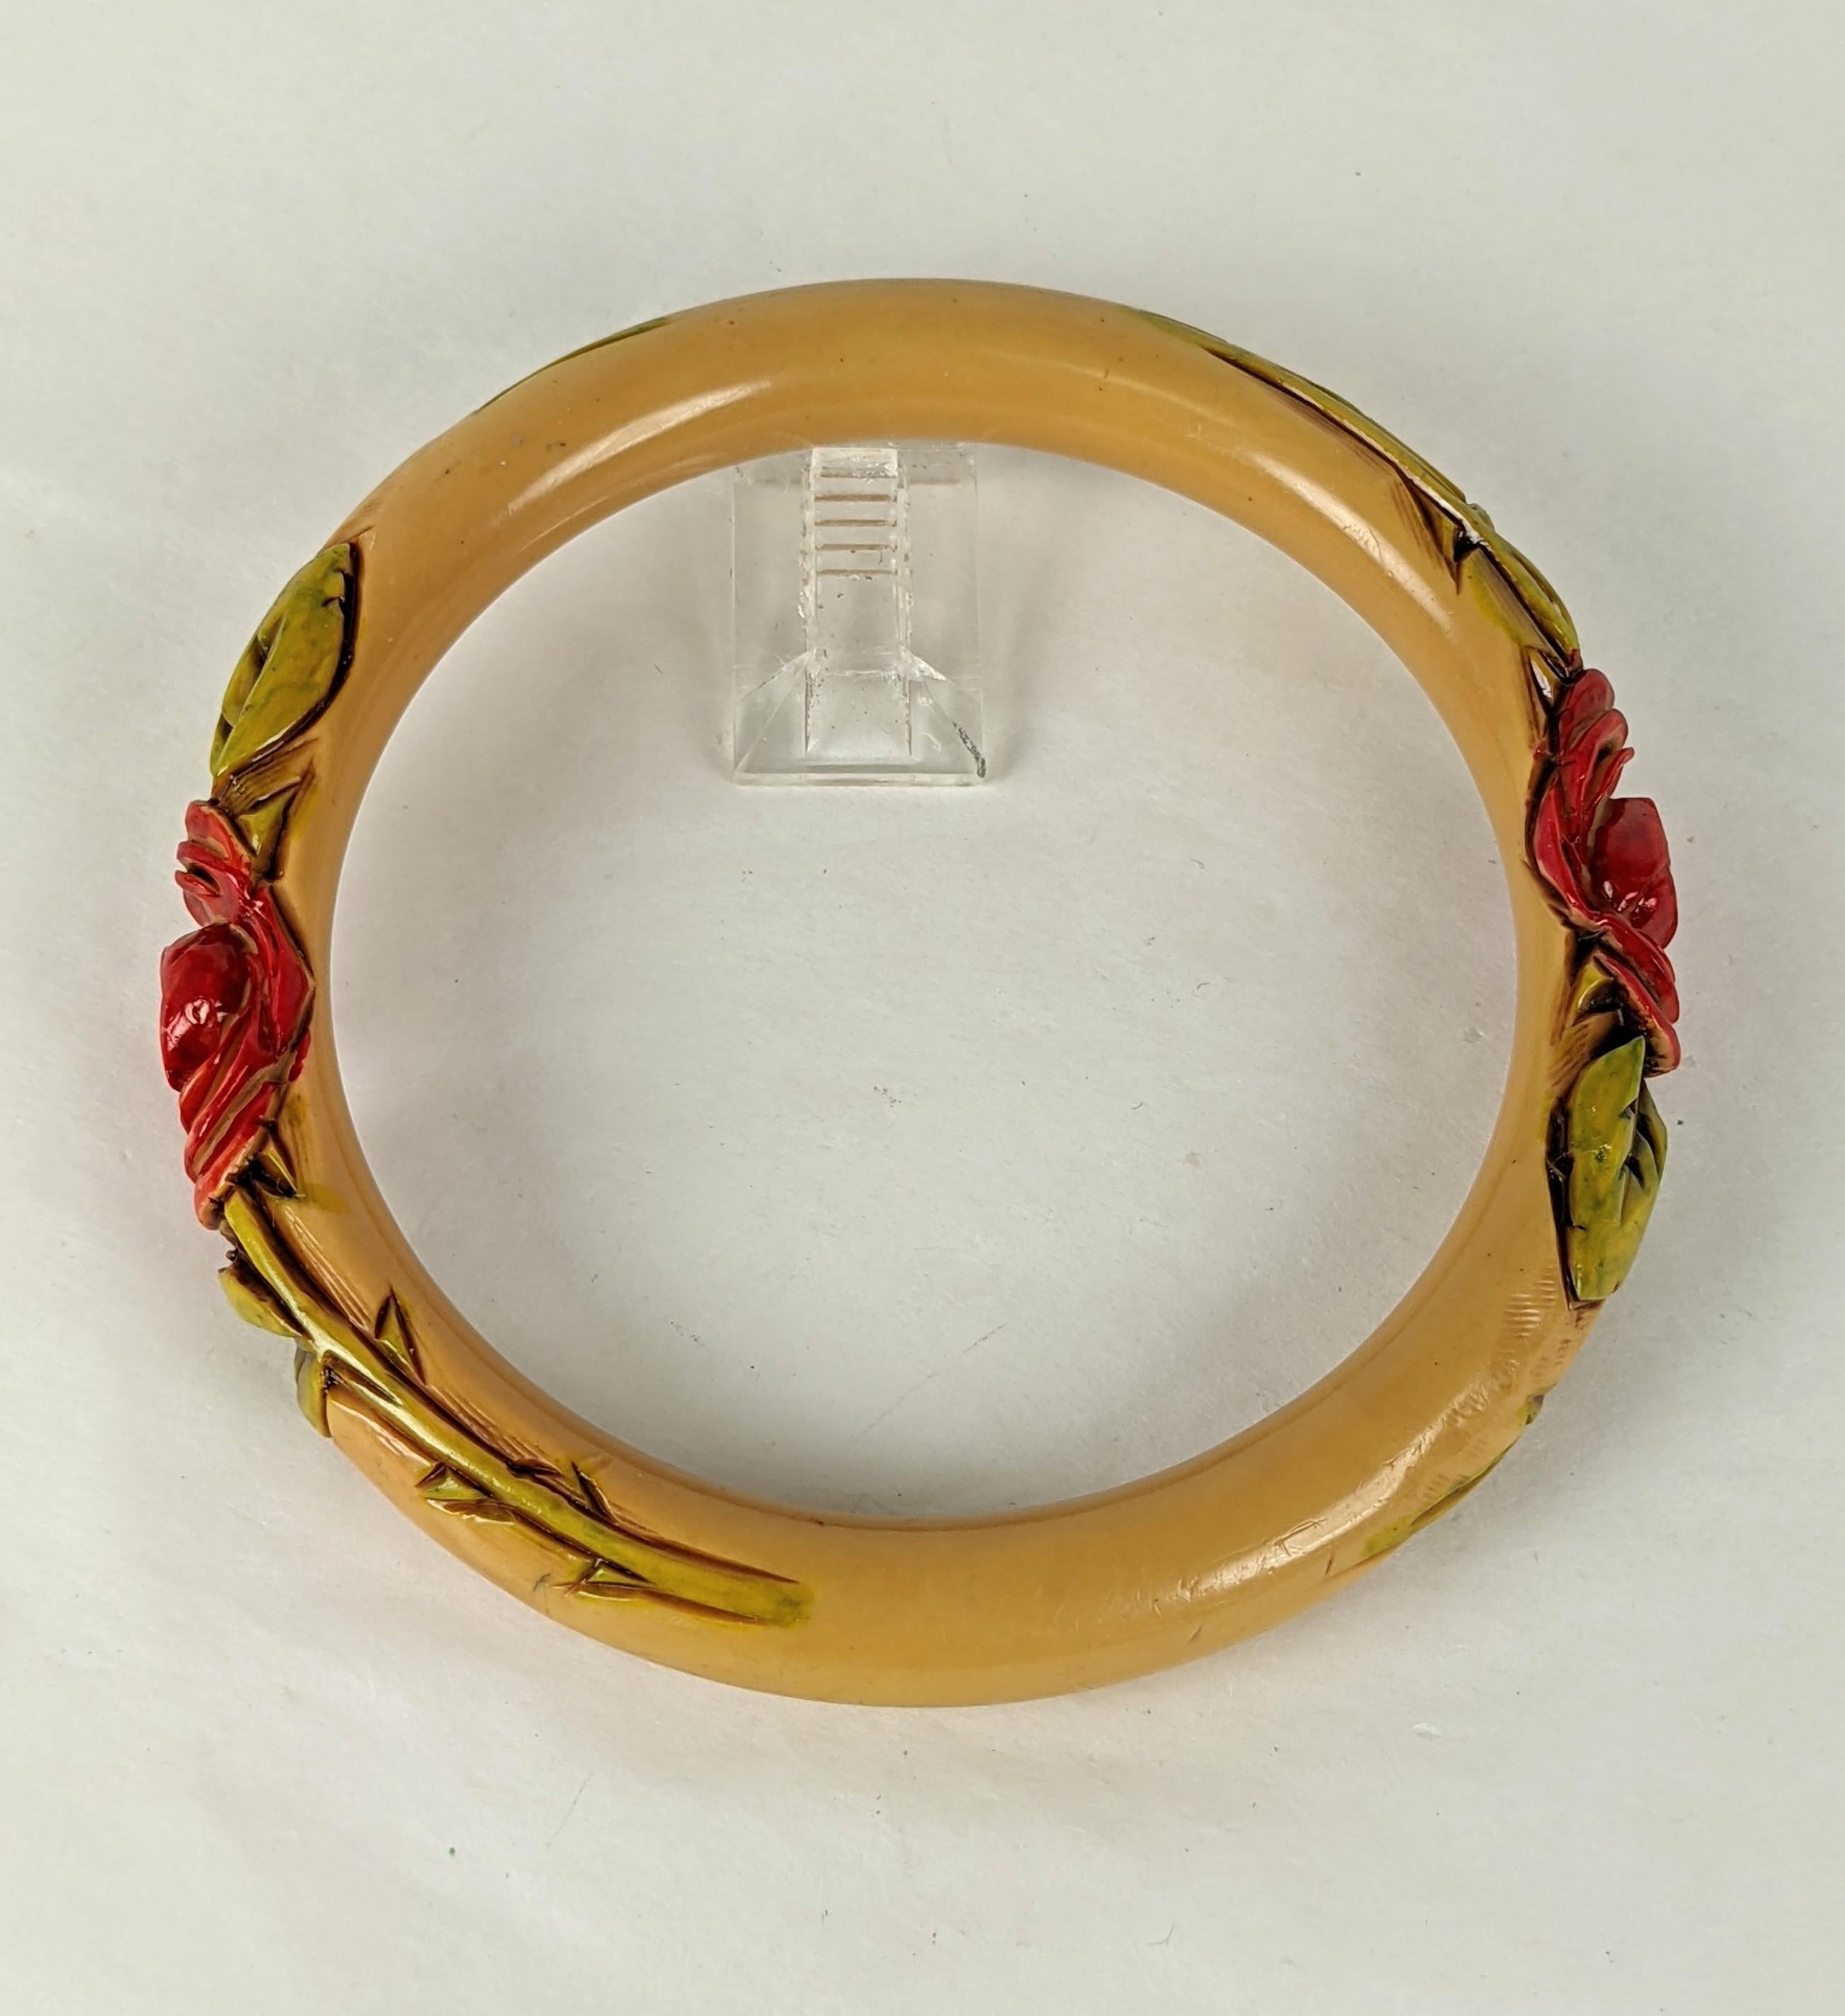 French Art deco carved bakelite rose bangle bracelet. The tubular cream color bracelet is hand carved with a sienna brown stain and cold painted with a deep pink unfurling rose and green stained leaves, rose stems, and thorns.
Excellent Condition.